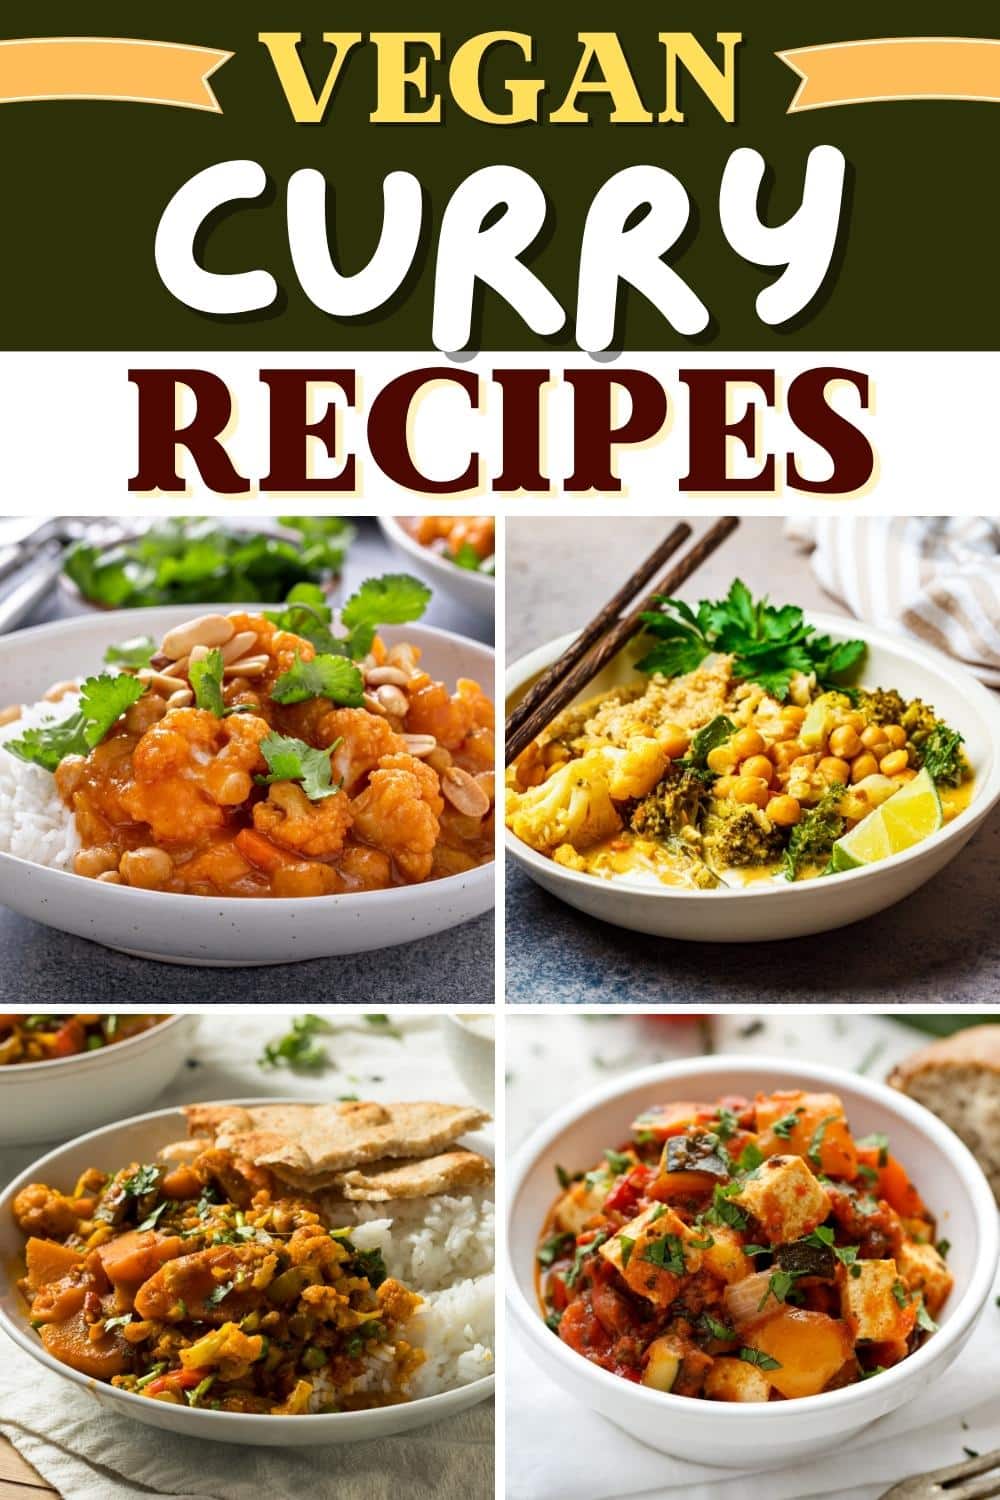 23 Best Vegan Curry Recipes (Easy Plant-Based Meals) - Insanely Good